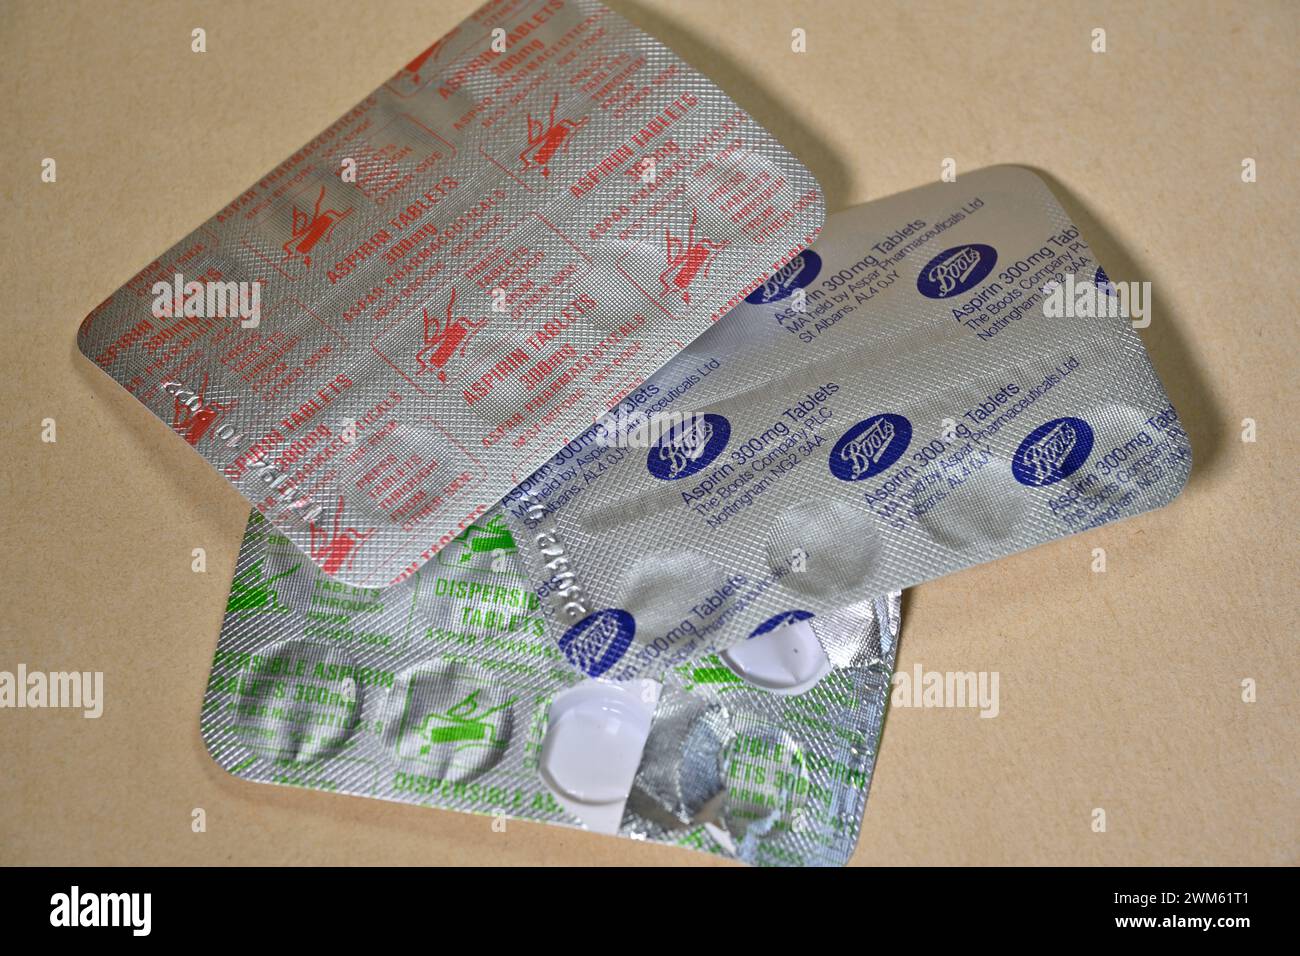 Aspirin tablets, pills individually wrapped in foil packaging which can't be recycled and increases costs Stock Photo